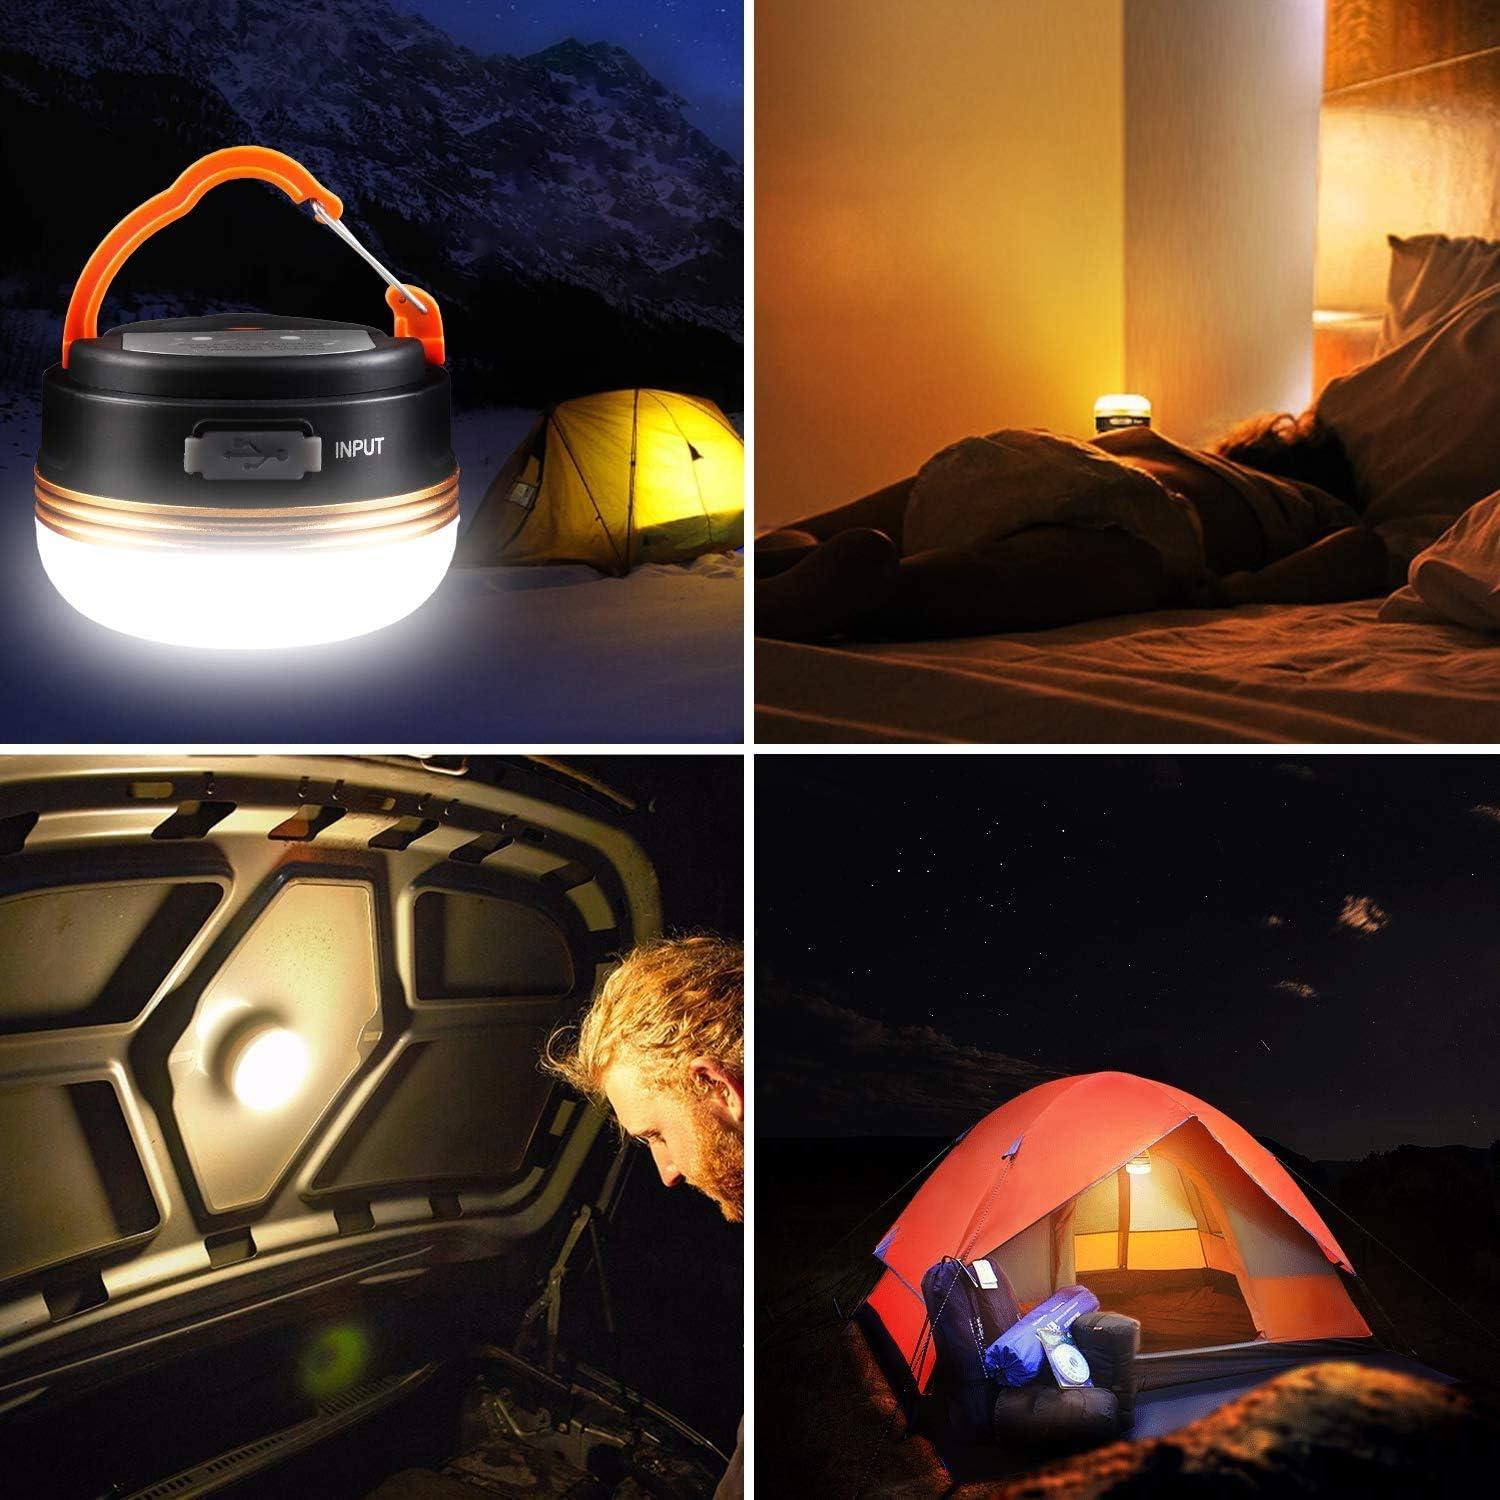 XBOSS H3 Led Camping Lantern Rechargeable Tent Light Waterproof